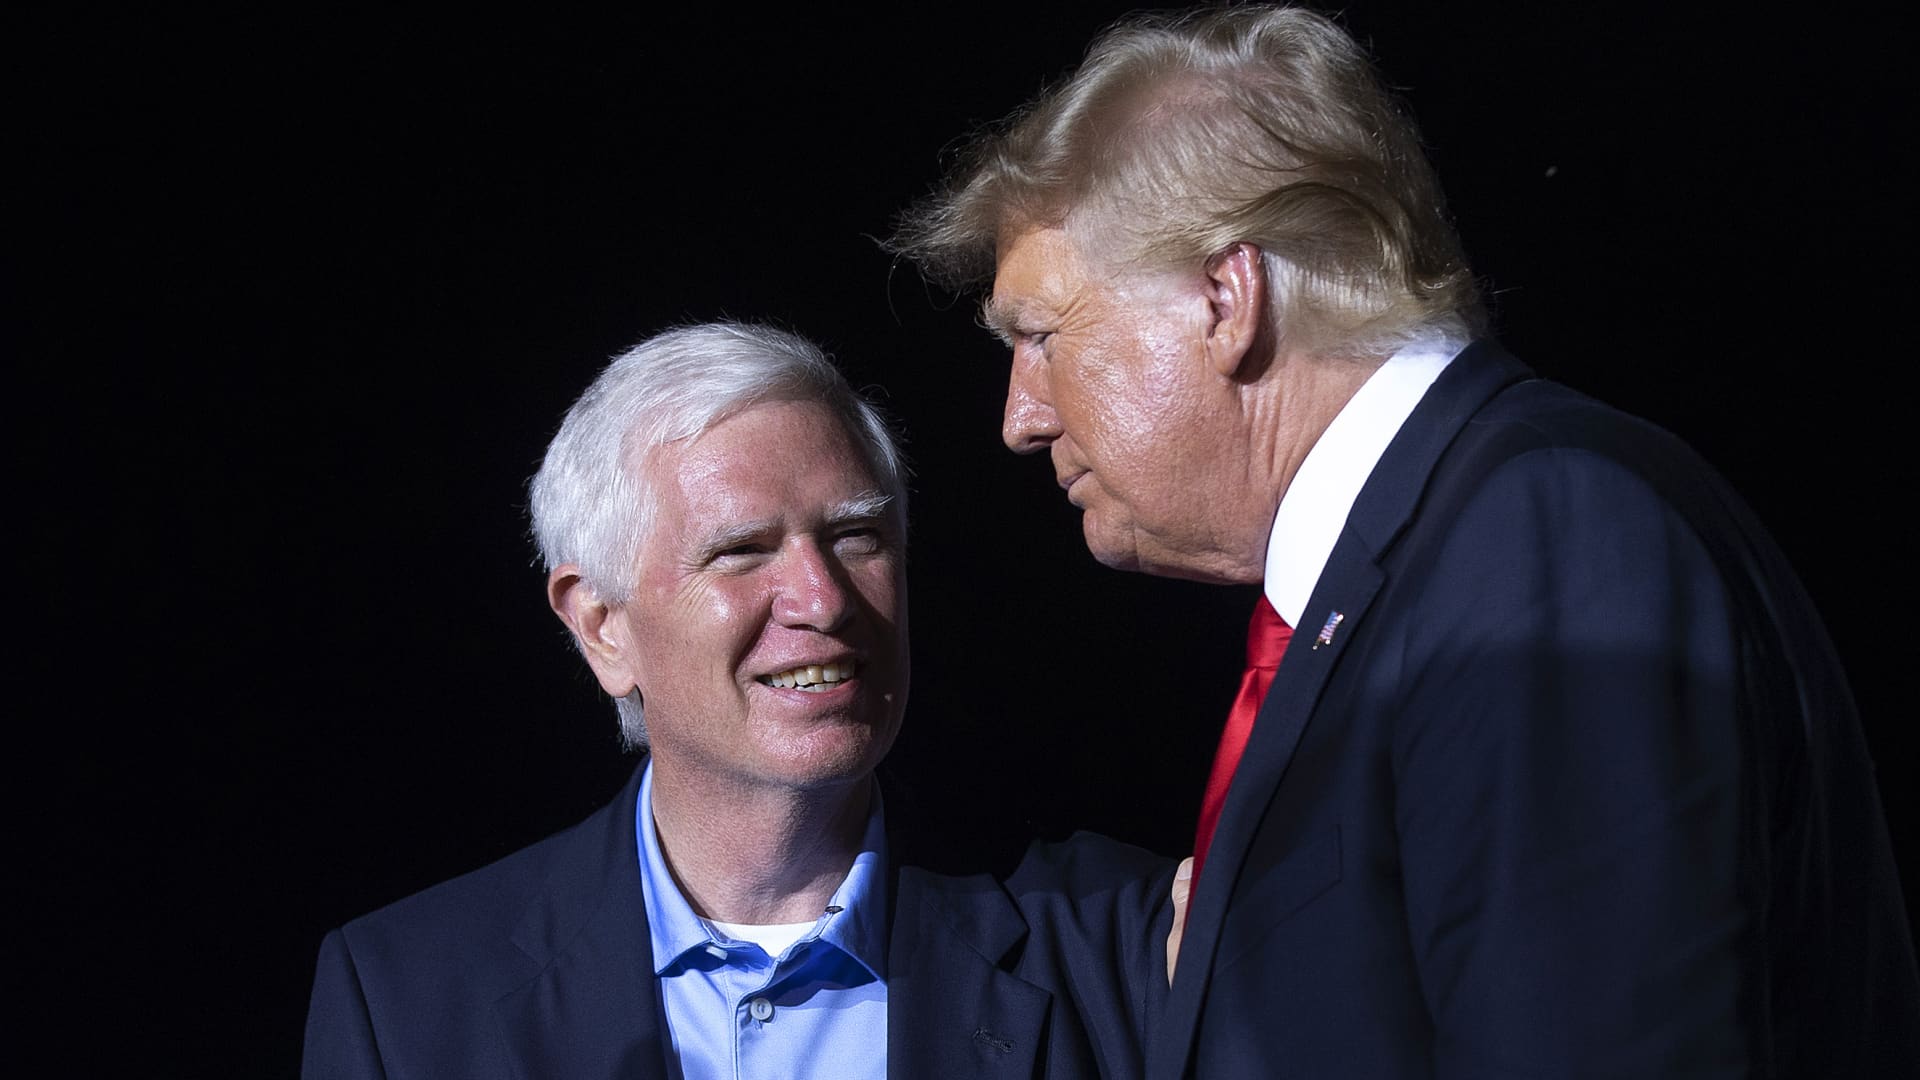 Trump withdraws endorsement of Alabama Senate candidate Mo Brooks, who urged GOP to stop questioning 2020 election